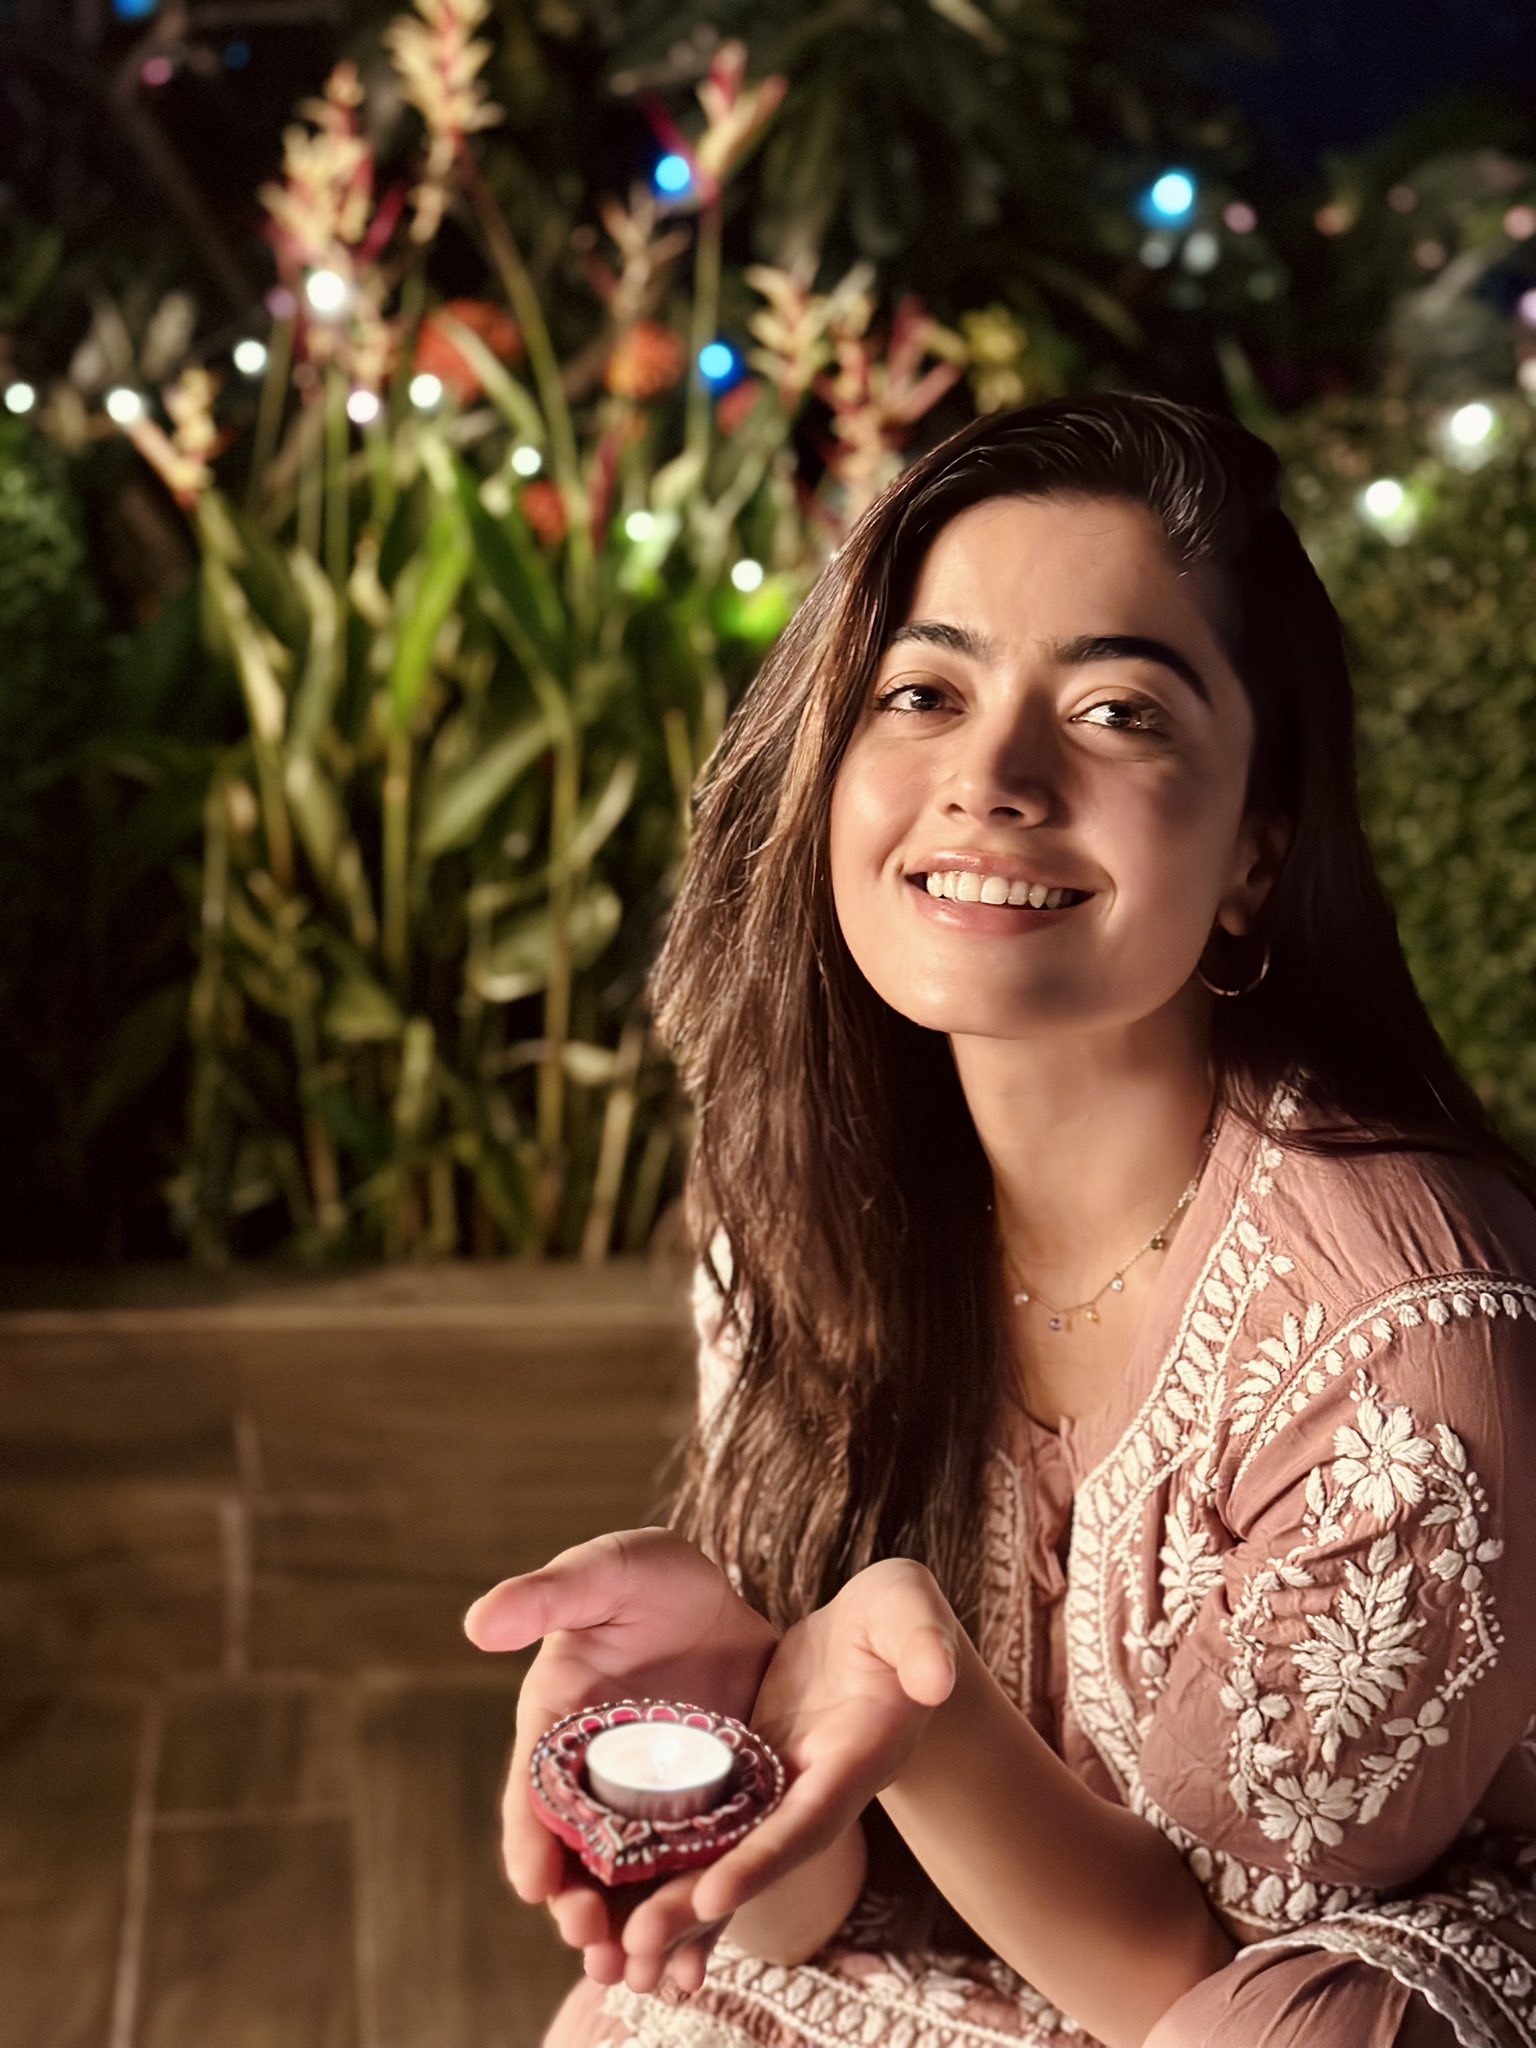 Rashmika Mandanna on X: "Happy Diwali everyone 🤍🌸 Smile big, Eat sweets, Stay blessed, Stay safe, Only and only love to you this Diwali. ❤️😄 https://t.co/QZhWZwEtwE" / X